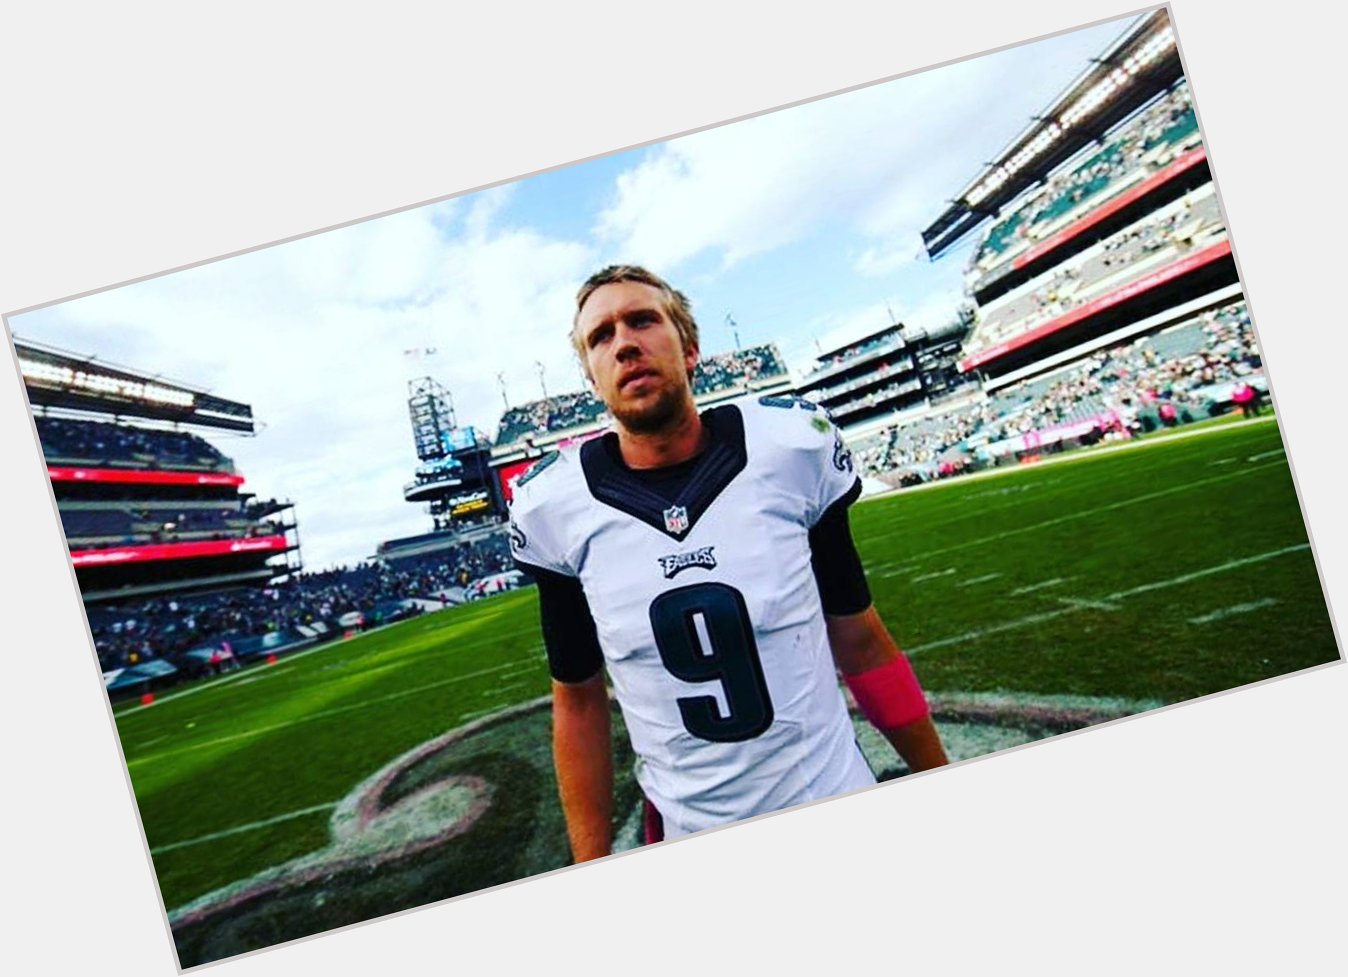 HAPPY BIRTHDAY TO THE MAN THAT IS GOING TO QUARTERBACK THE TO THE SUPER BOWL, NICK FOLES! 